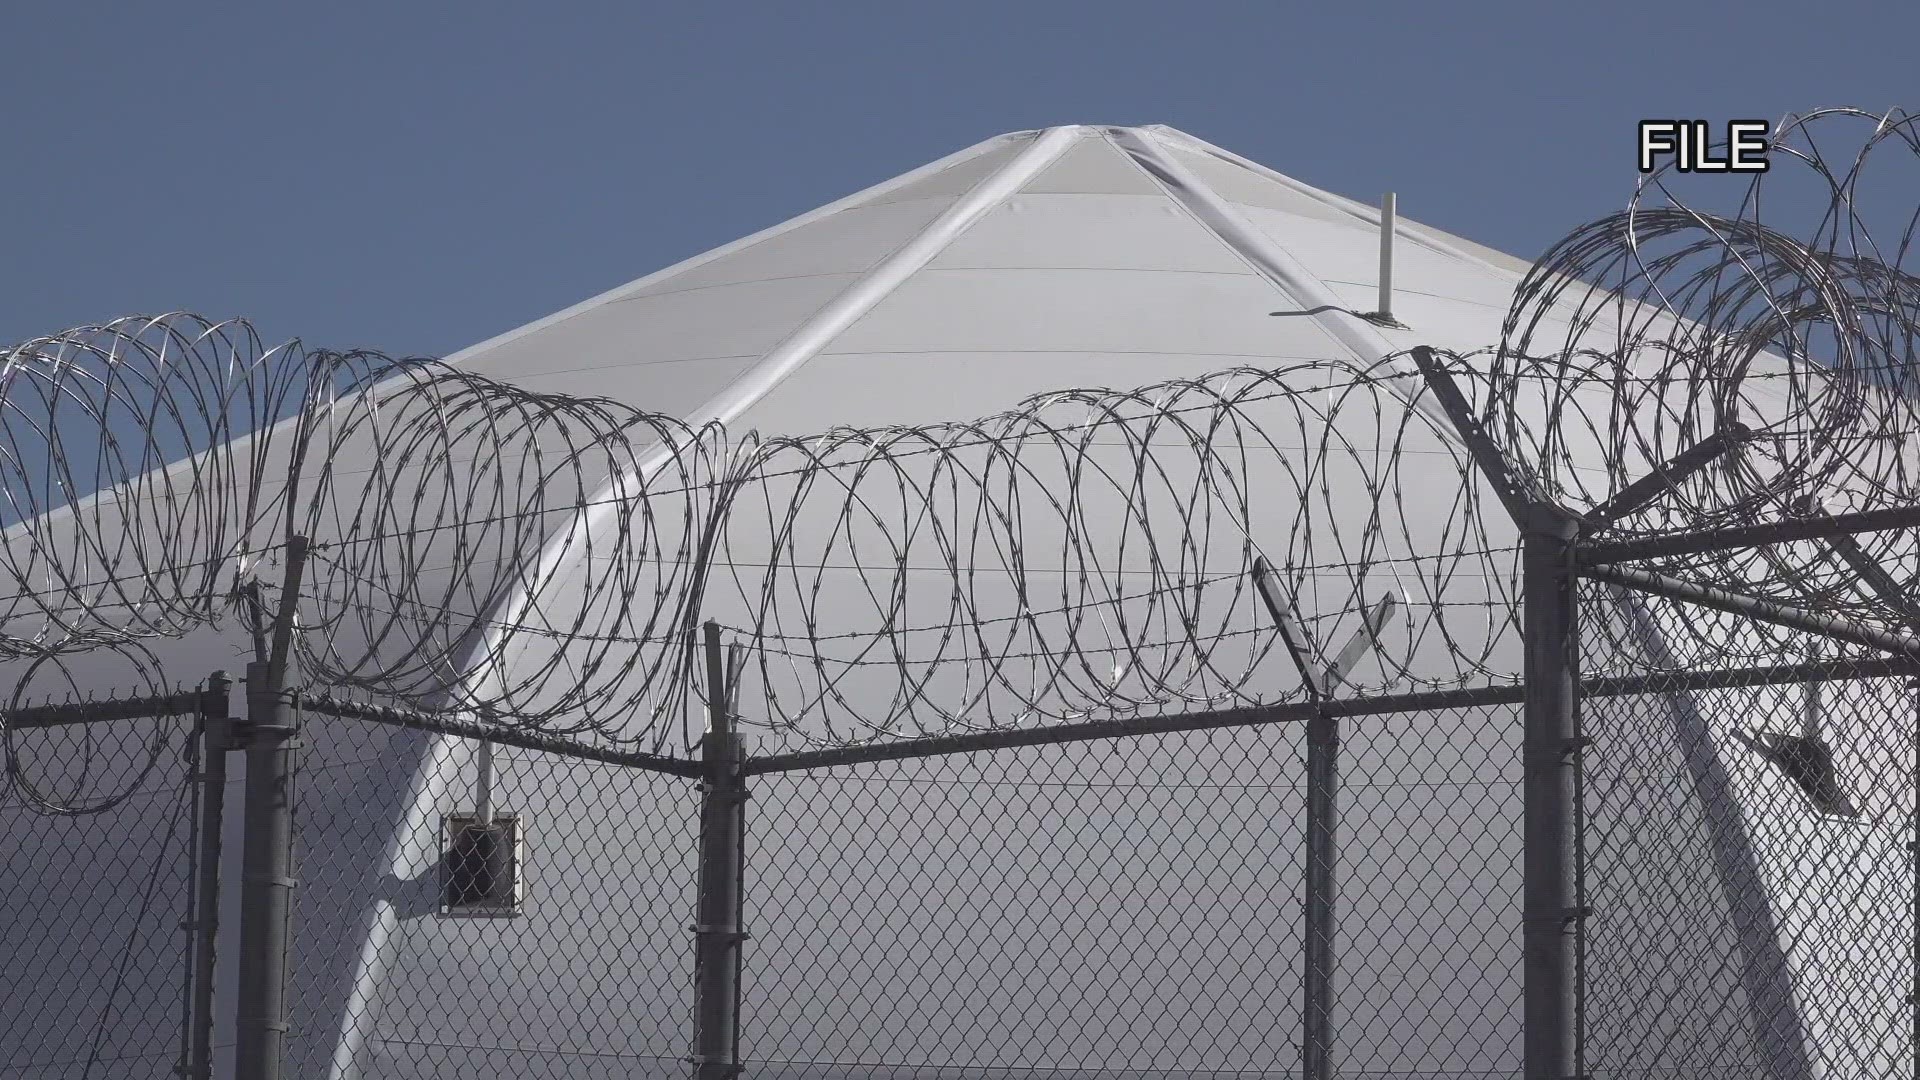 The price tag for the new Midland jail would be $170 million. A special meeting held in Midland Wednesday discussed the new jail and the hiring of a law firm.